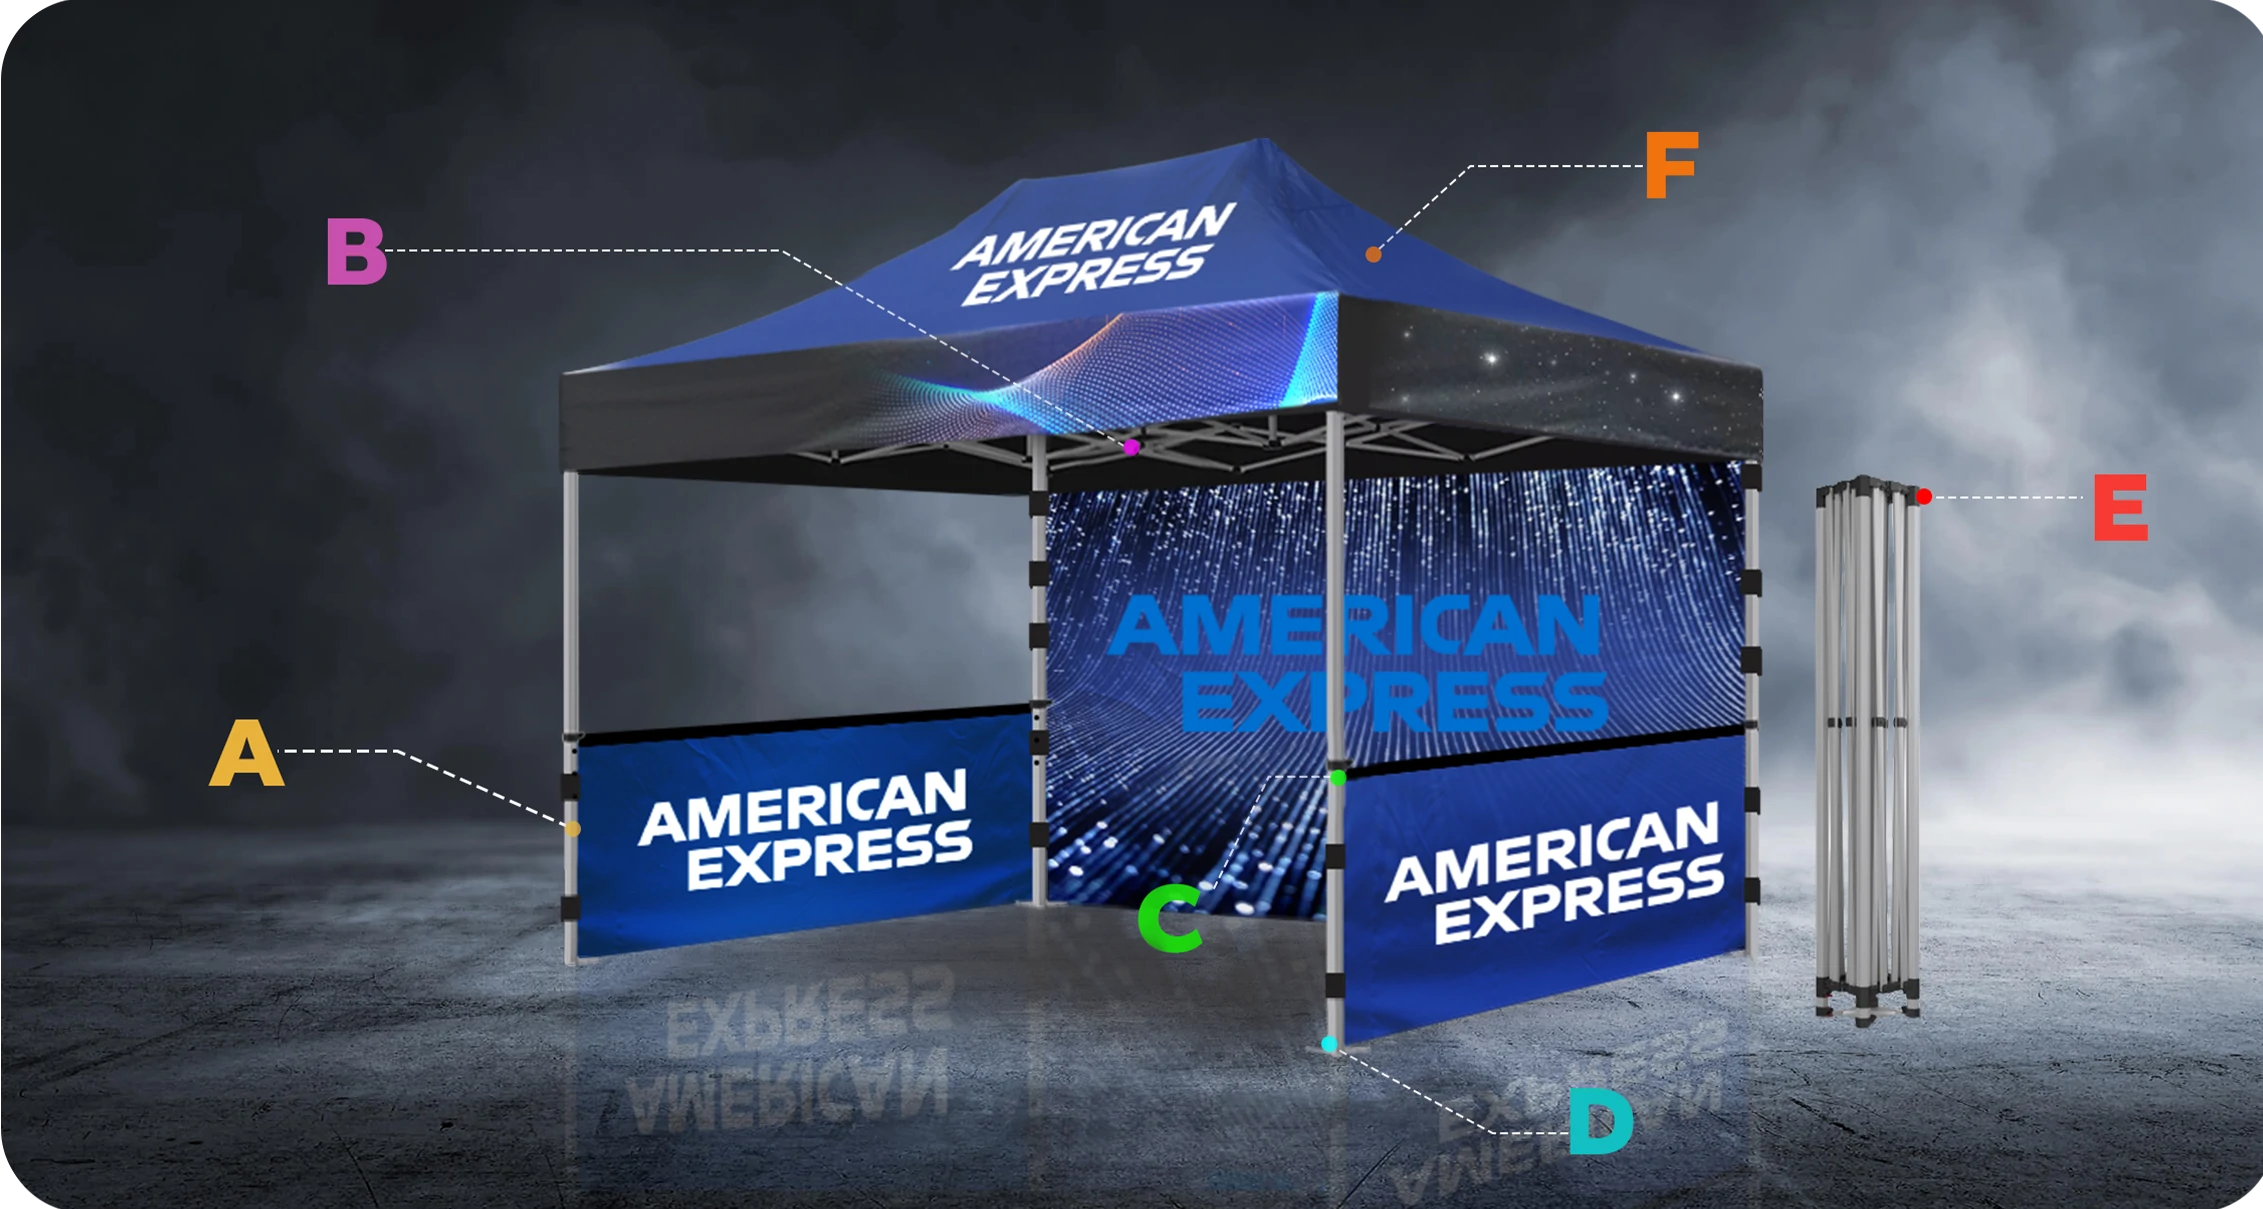 Recommended Supplier For a reputable supplier of Custom Canopy Tents, consider https://canopy-tents.com/. They offer:  High-Quality Materials: Durable tents designed to last. Customization Options: Full-color printing, various sizes, and additional accessories. Excellent Customer Service: Responsive and helpful support throughout the ordering process.